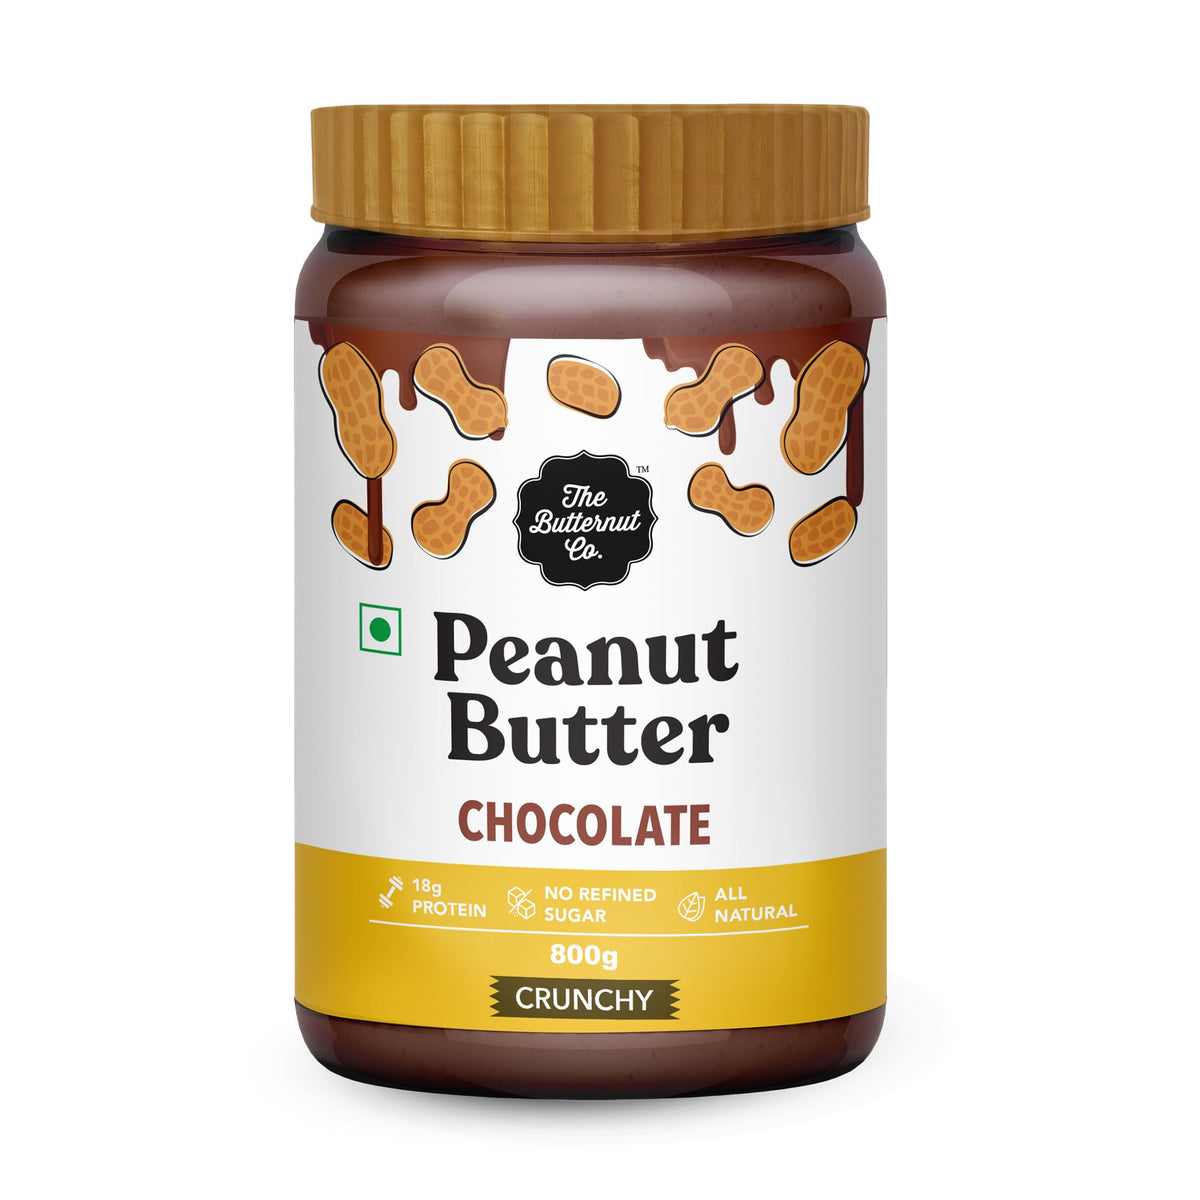 The Butternut Co. Peanut Butter Chocolate,Crunchy | 18 g Protein | No Refined Sugar | High Protein, Nutritious and Delicious Treat for Breakfast | All Natural| No Cholesterol - 800 g (Pack of 1)